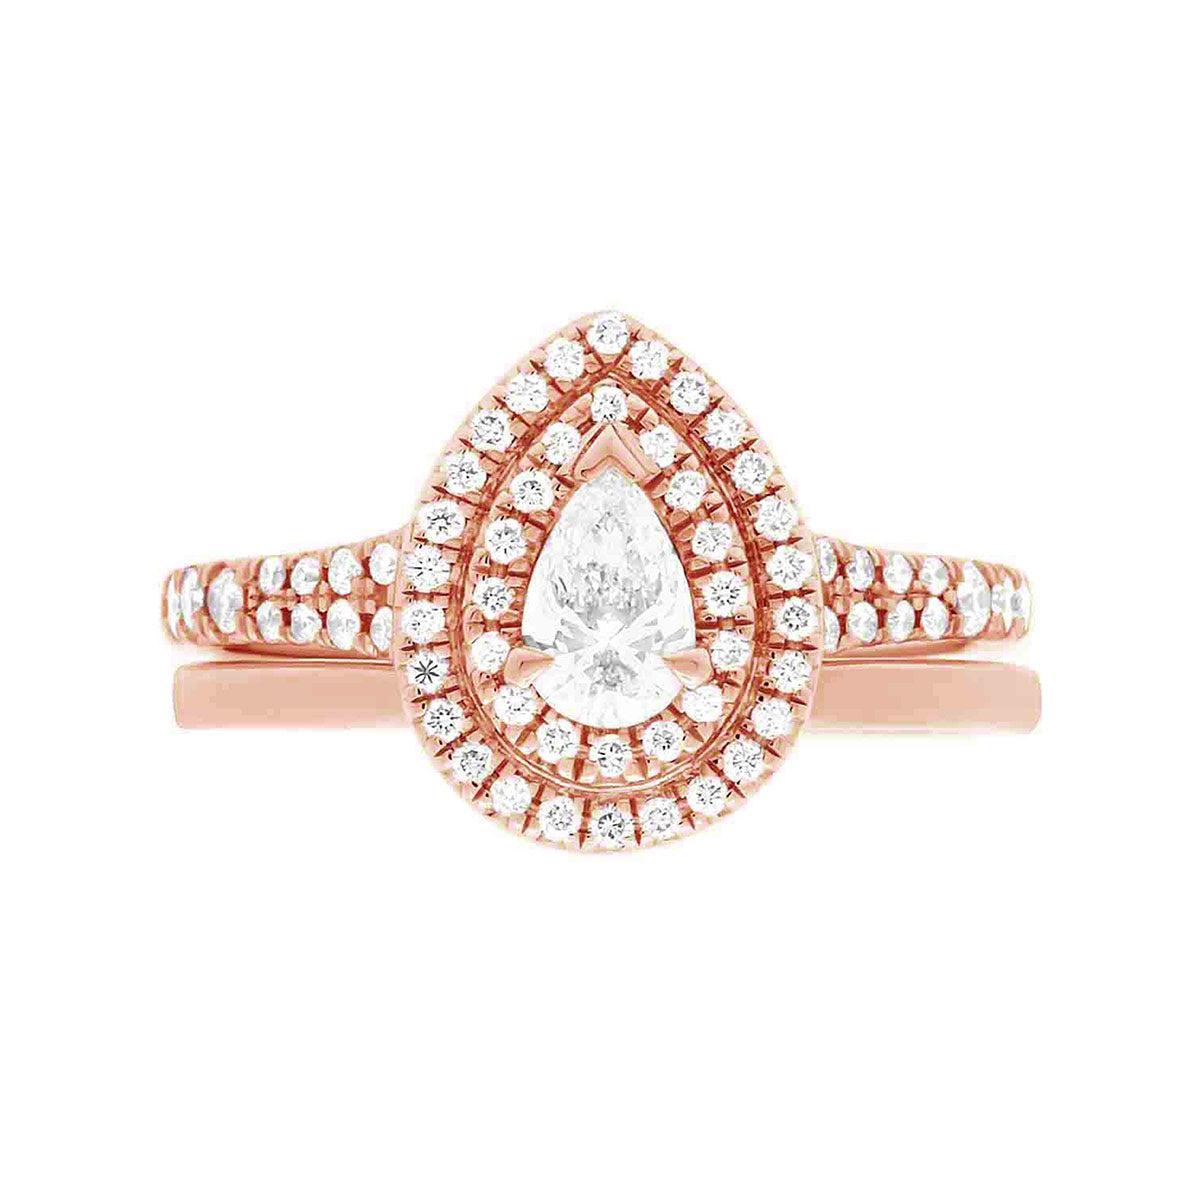 Double Halo Pear Diamond Ring in rose gold in a vertical position